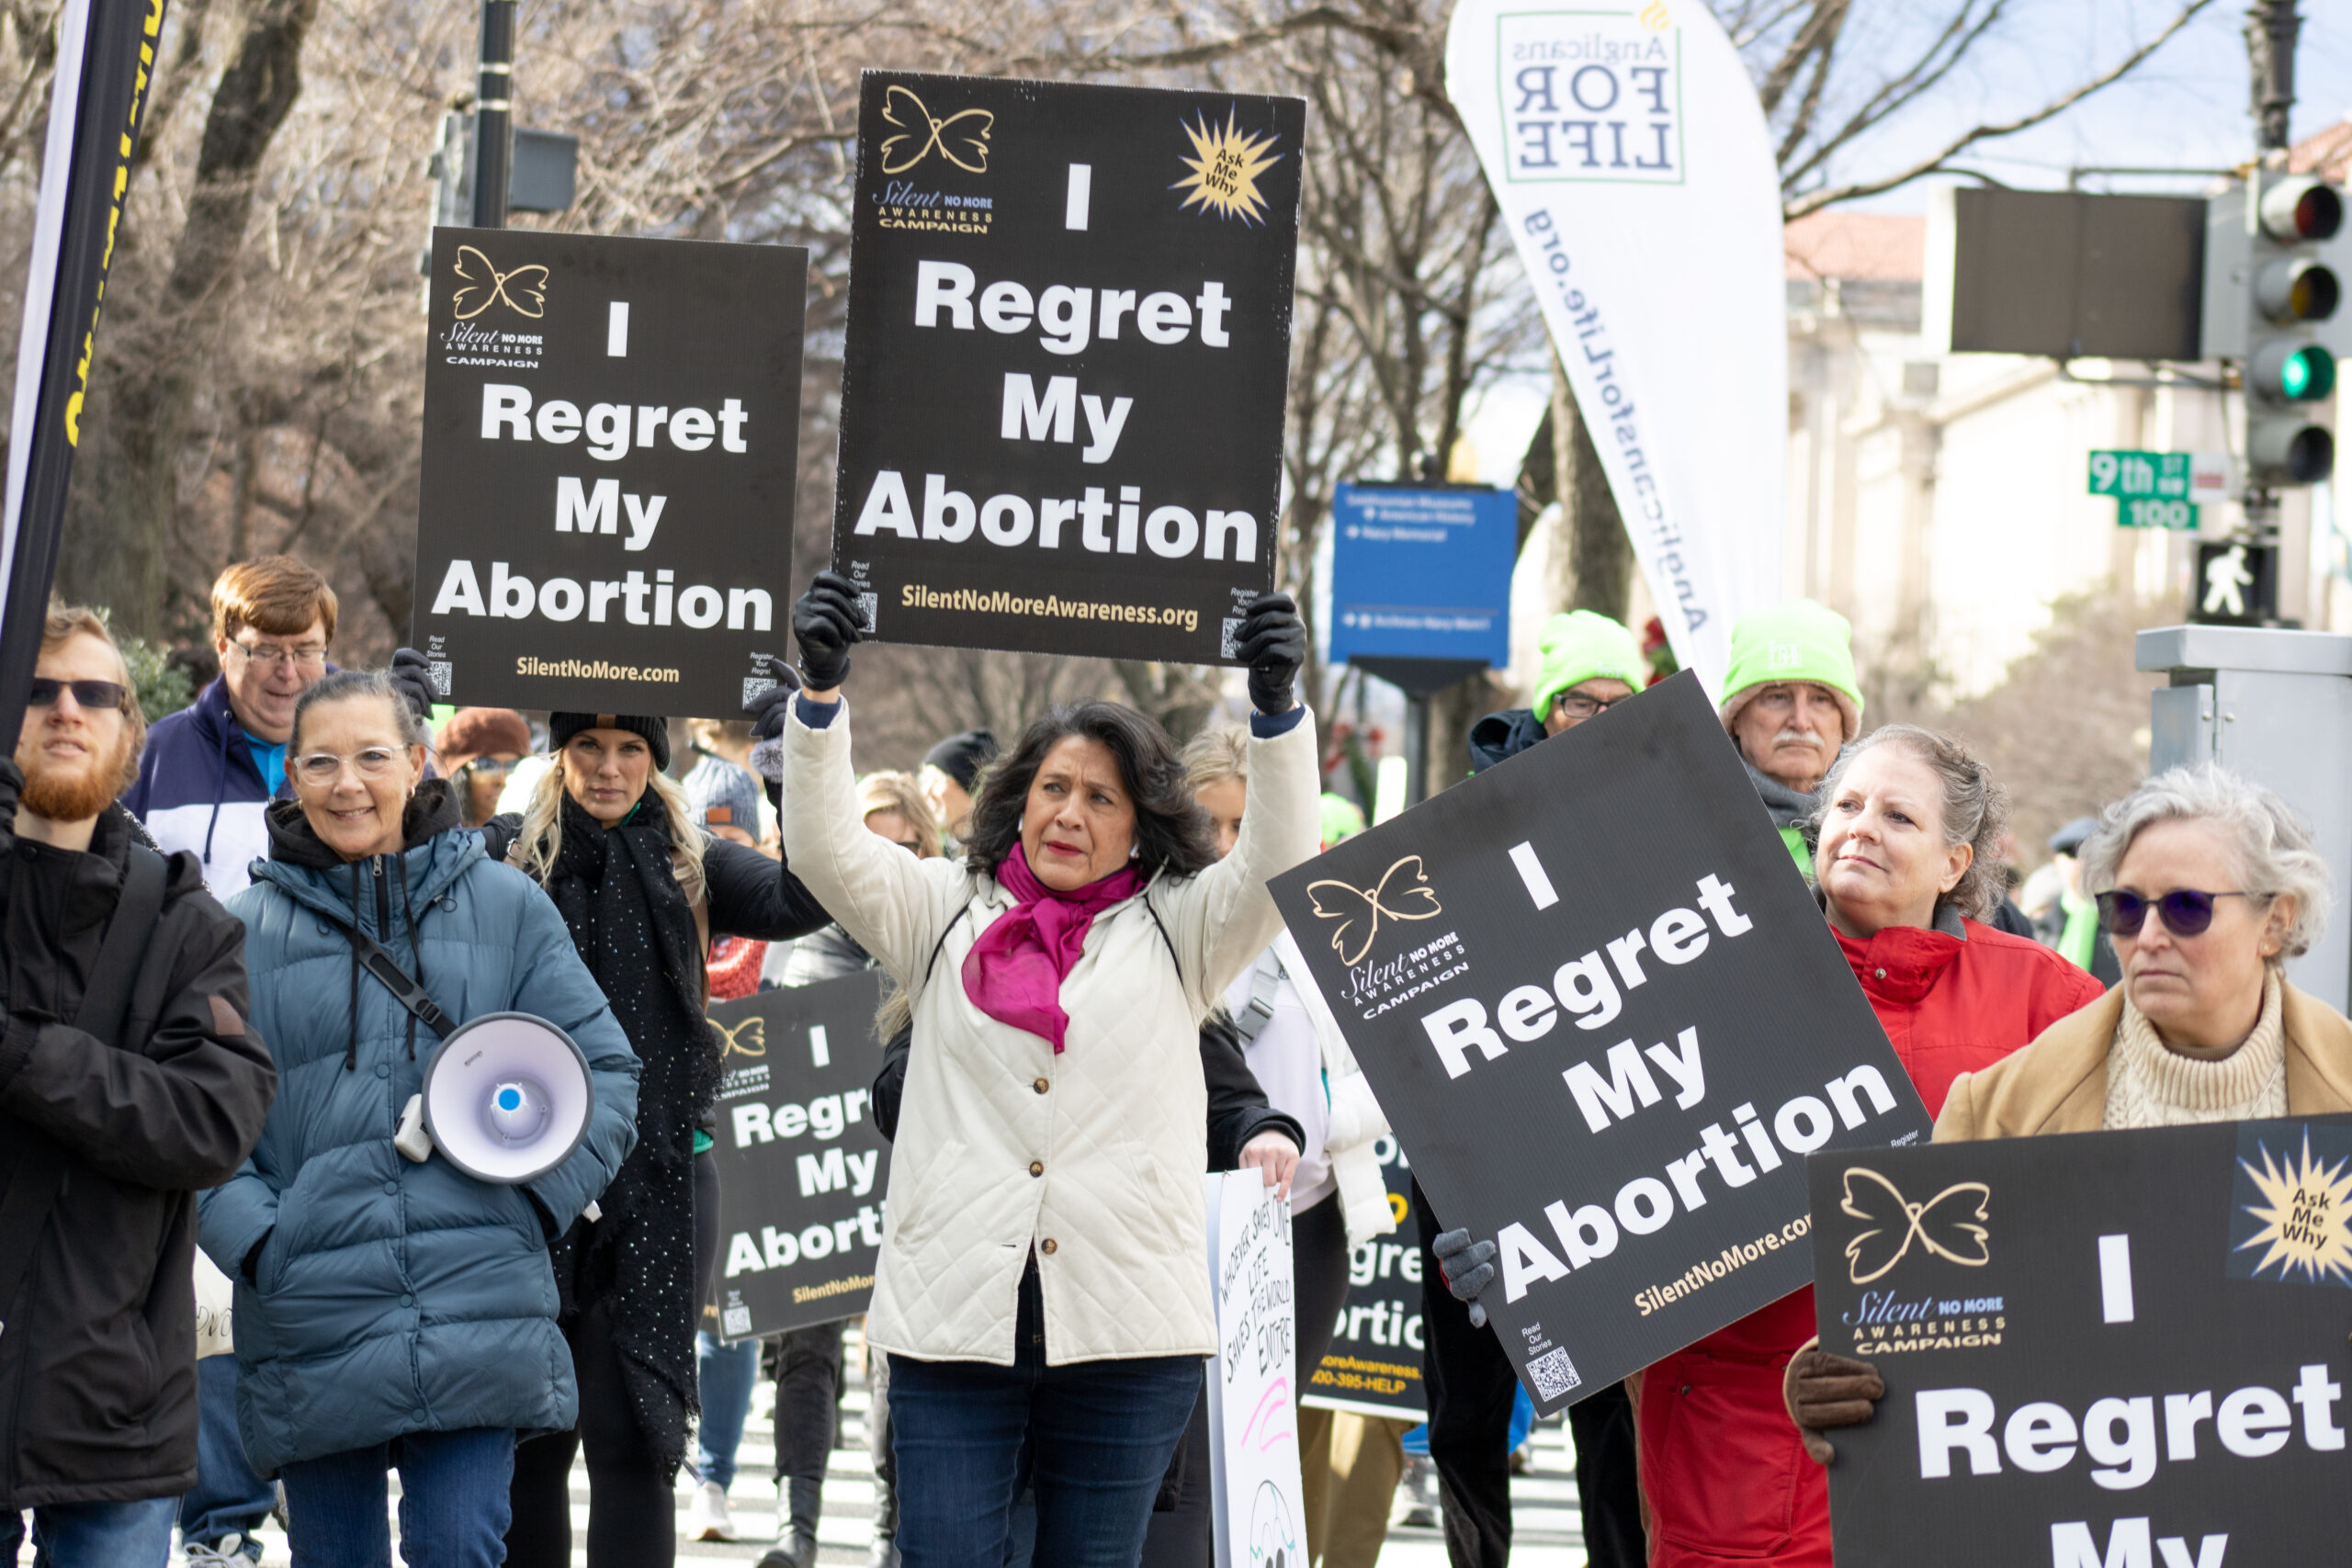 Woman holding "I regret my abortion" sign 